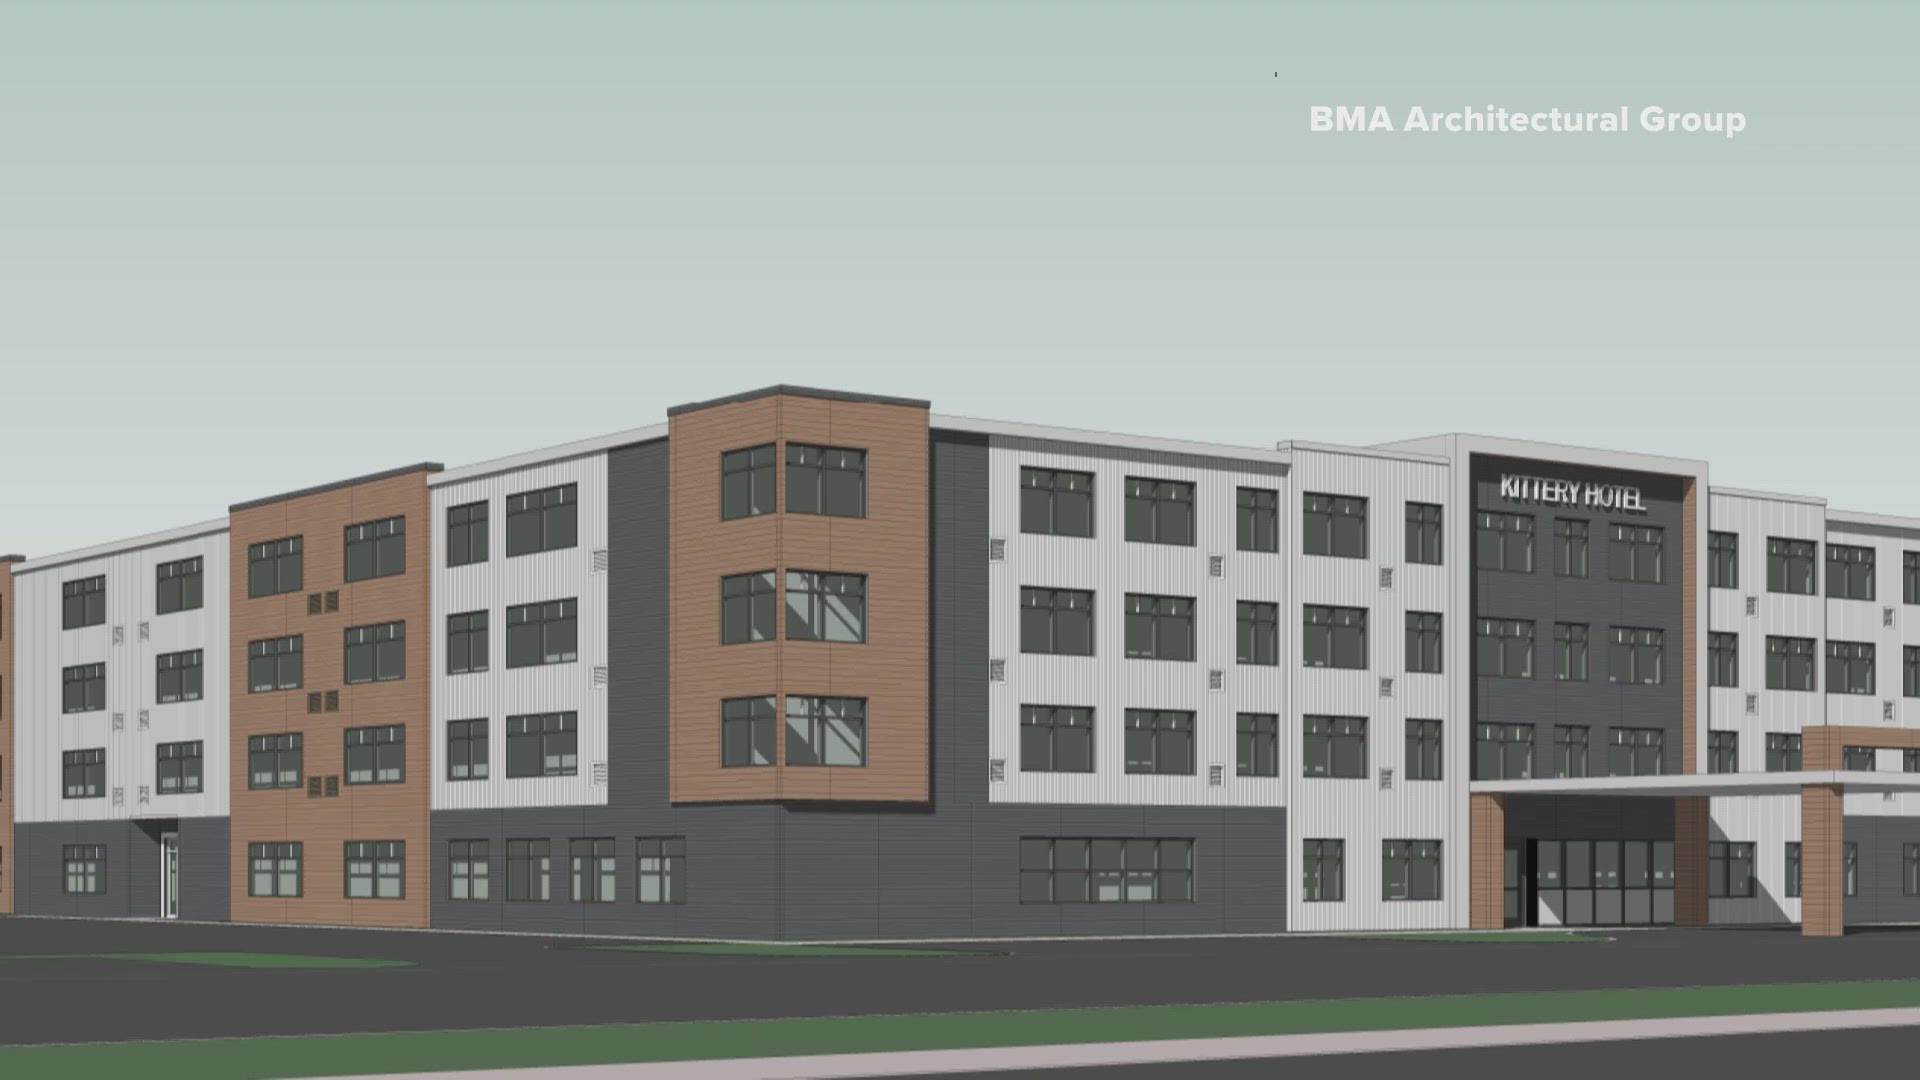 The town gave final approval to the plan, which includes building a 107-unit apartment complex and a 119-room hotel and commercial building meant for a restaurant.